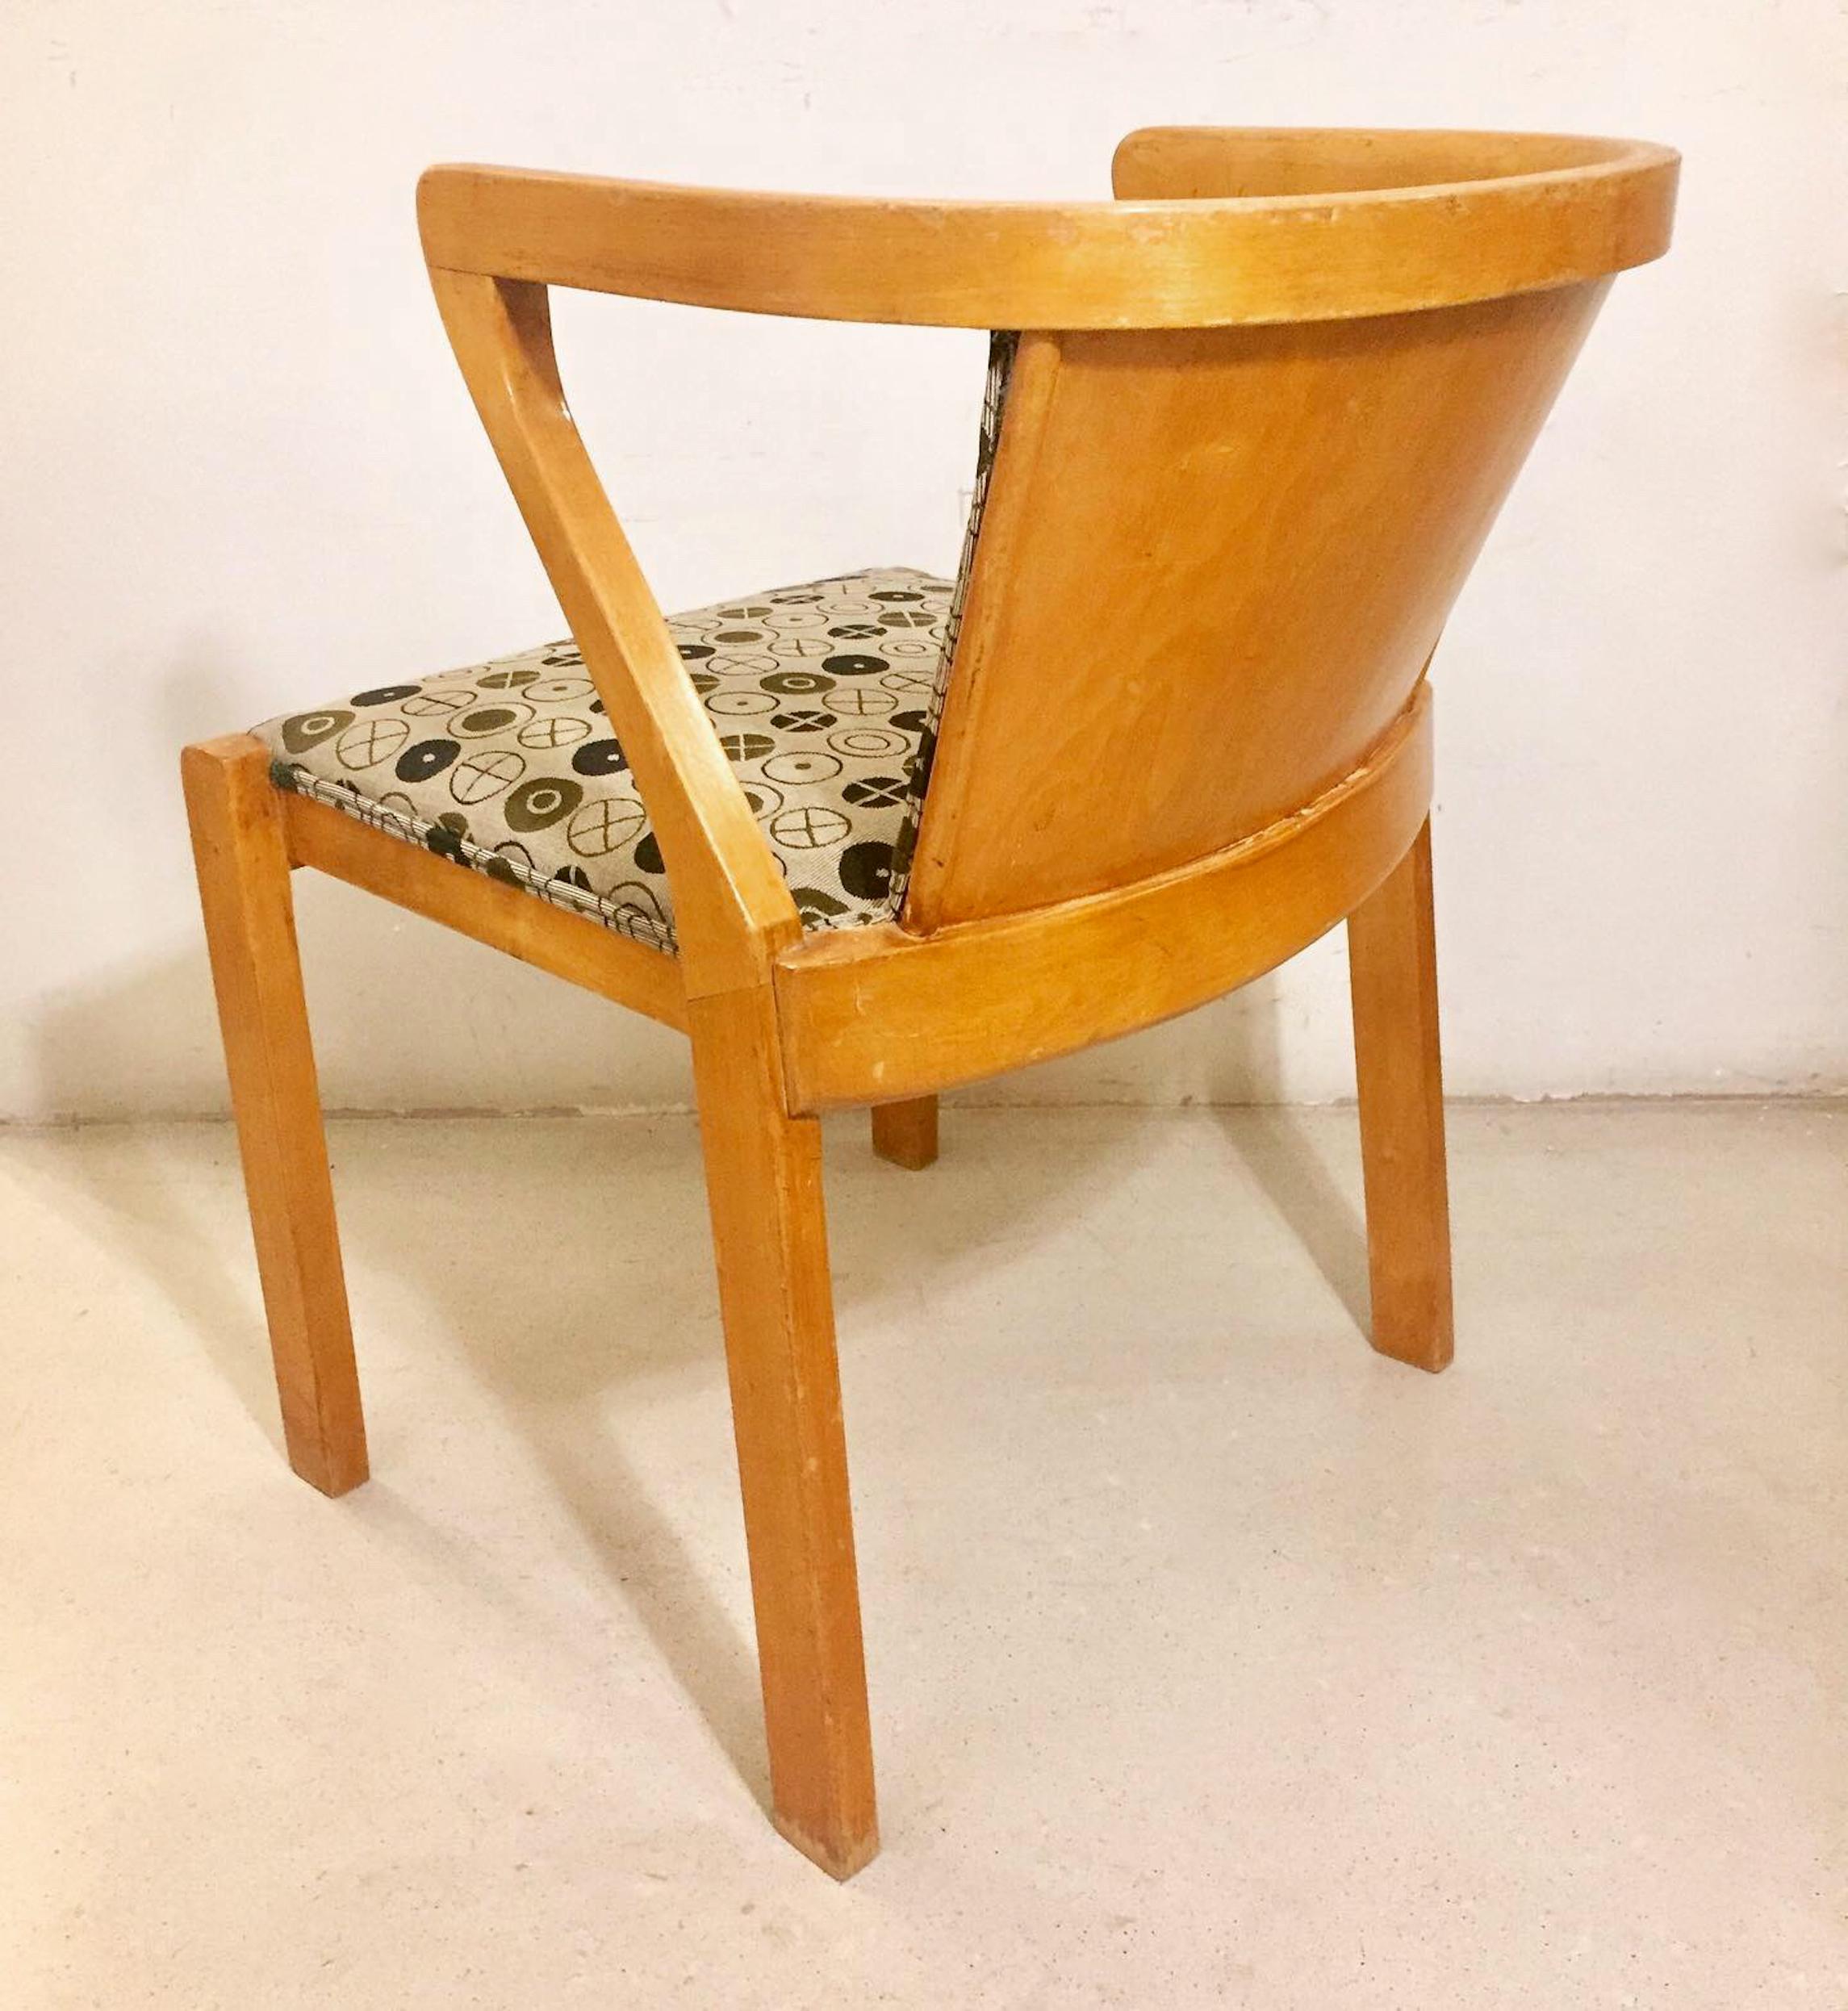 An Alvar Aalto Borchardt chair, model 15, designed by Alvar Aalto and edited in 1930. Stamped. Upholstered in Eames style fabrics. Excellent condition.